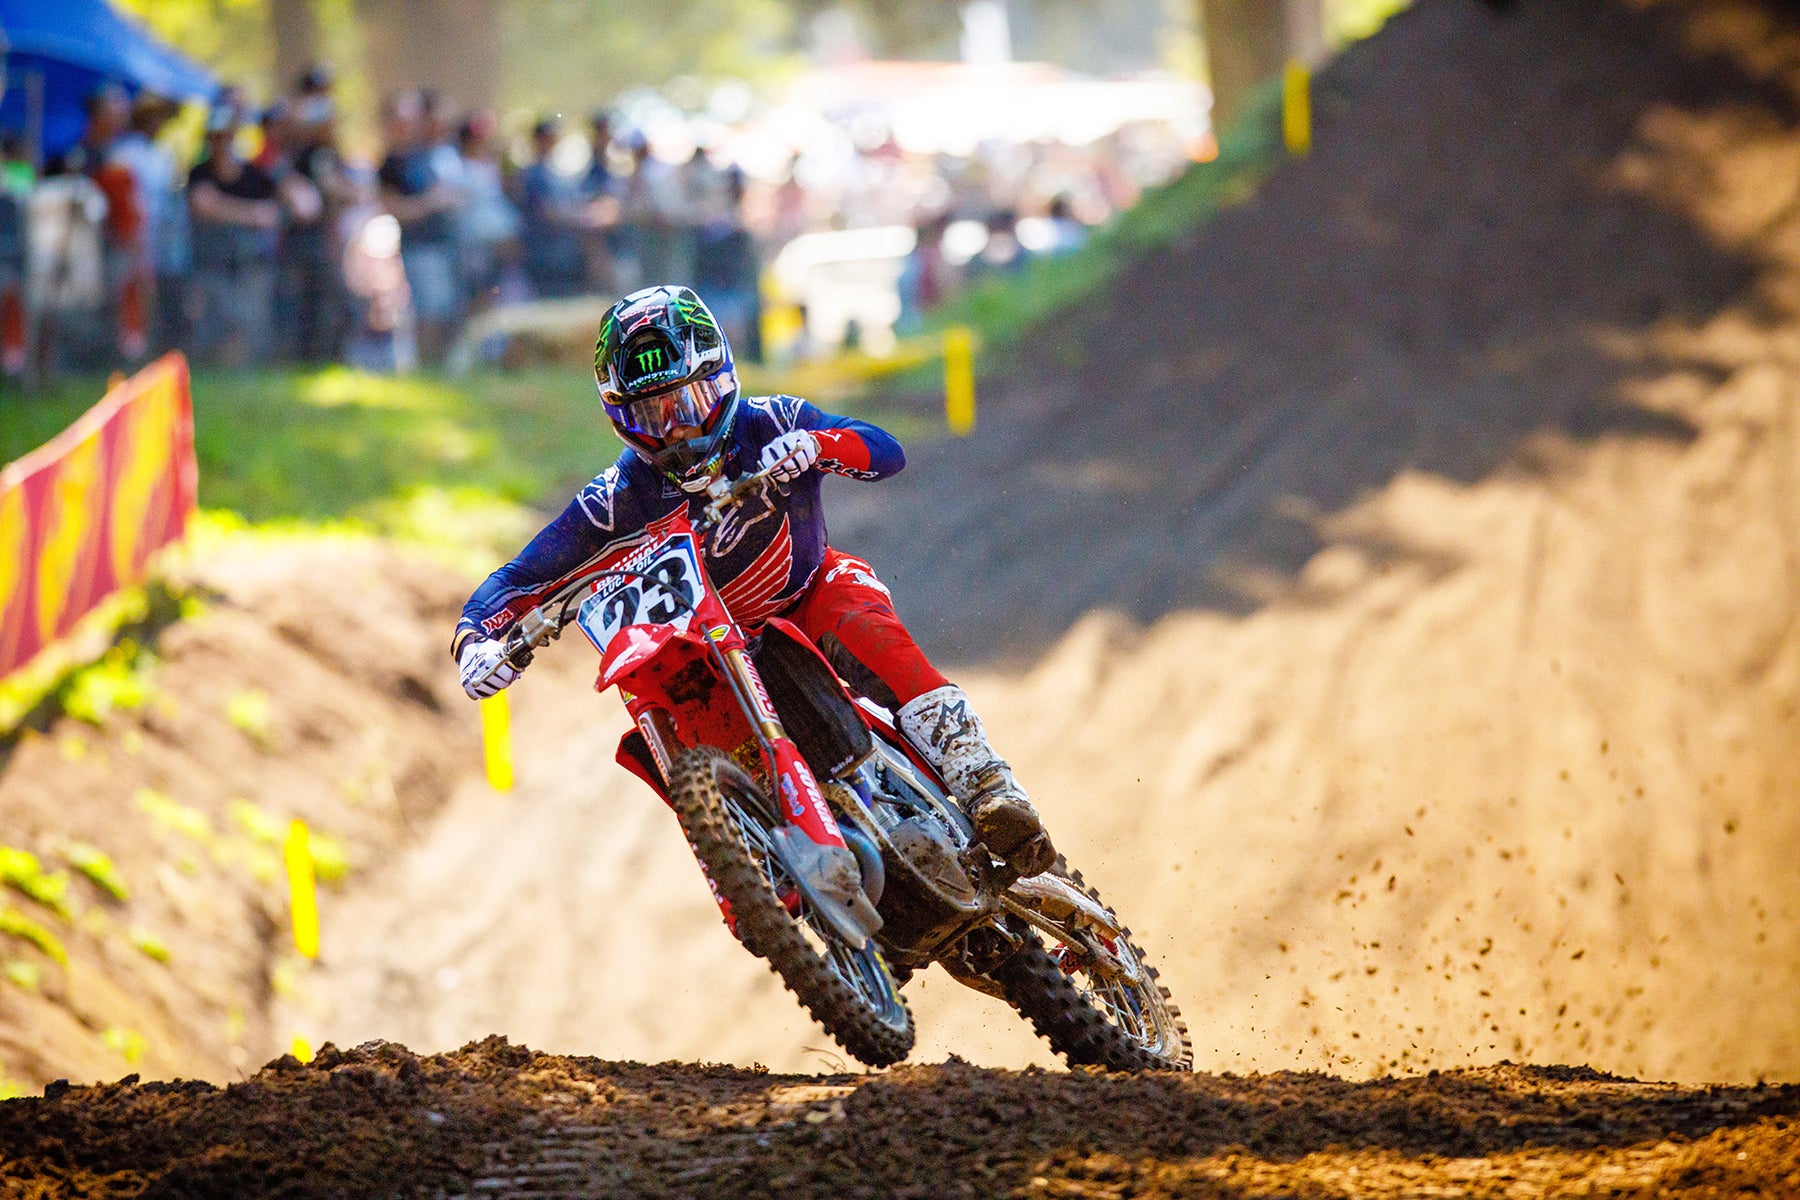 ALPINESTARS TOP EIGHT LOCK-OUT AS CHASE SEXTON STORMS TO 450MX VICTORY AT WASHOUGAL MX PARK, WASHINGTON; ELI TOMAC SECOND, DYLAN FERRANDIS THIRD